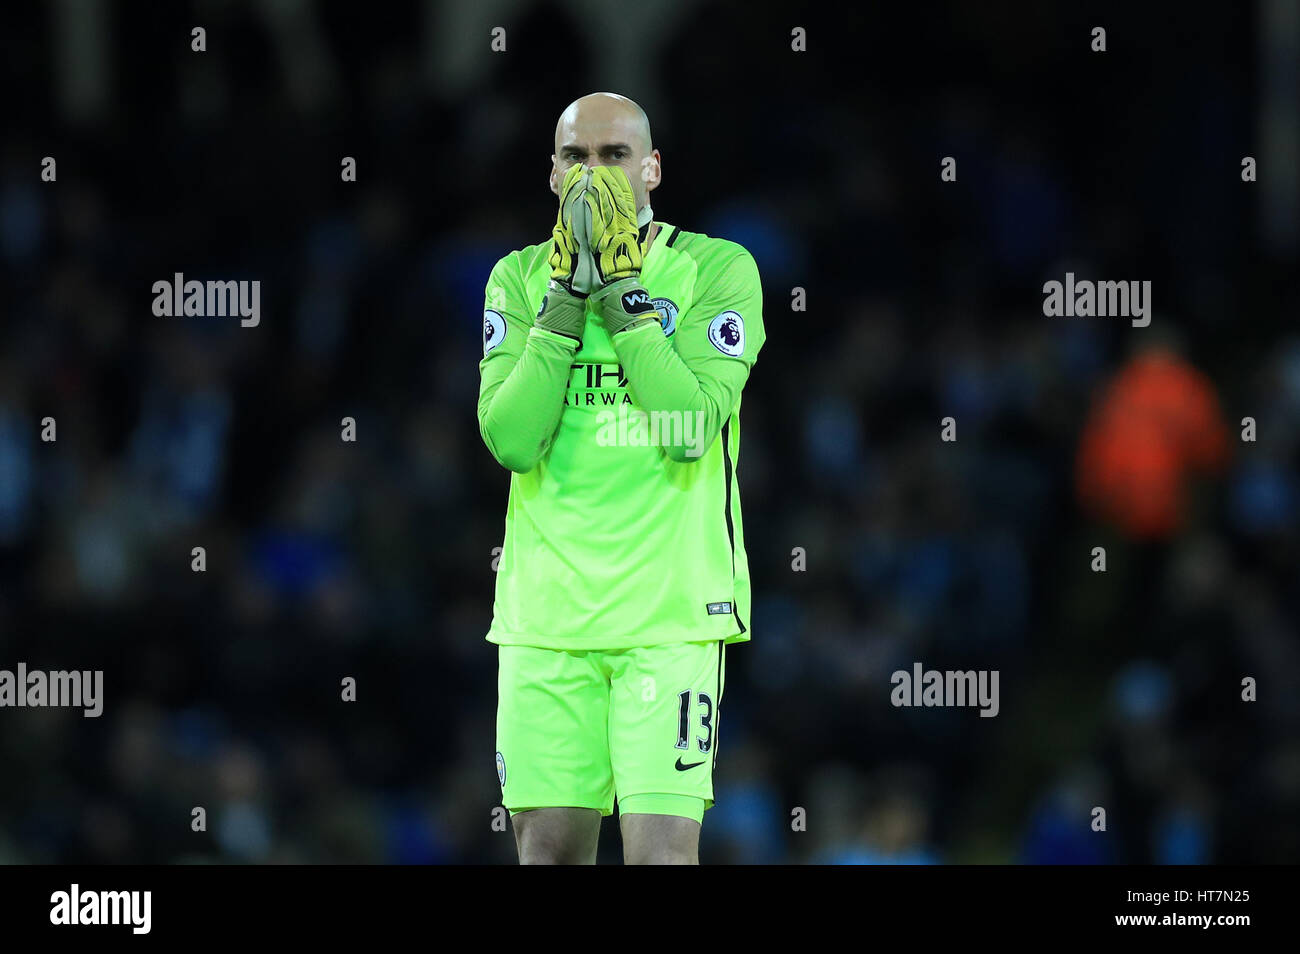 Manchester City goalkeeper Willy Caballero looks frustrated after a missed chance during the Premier League match at the Etihad Stadium, Manchester. Stock Photo